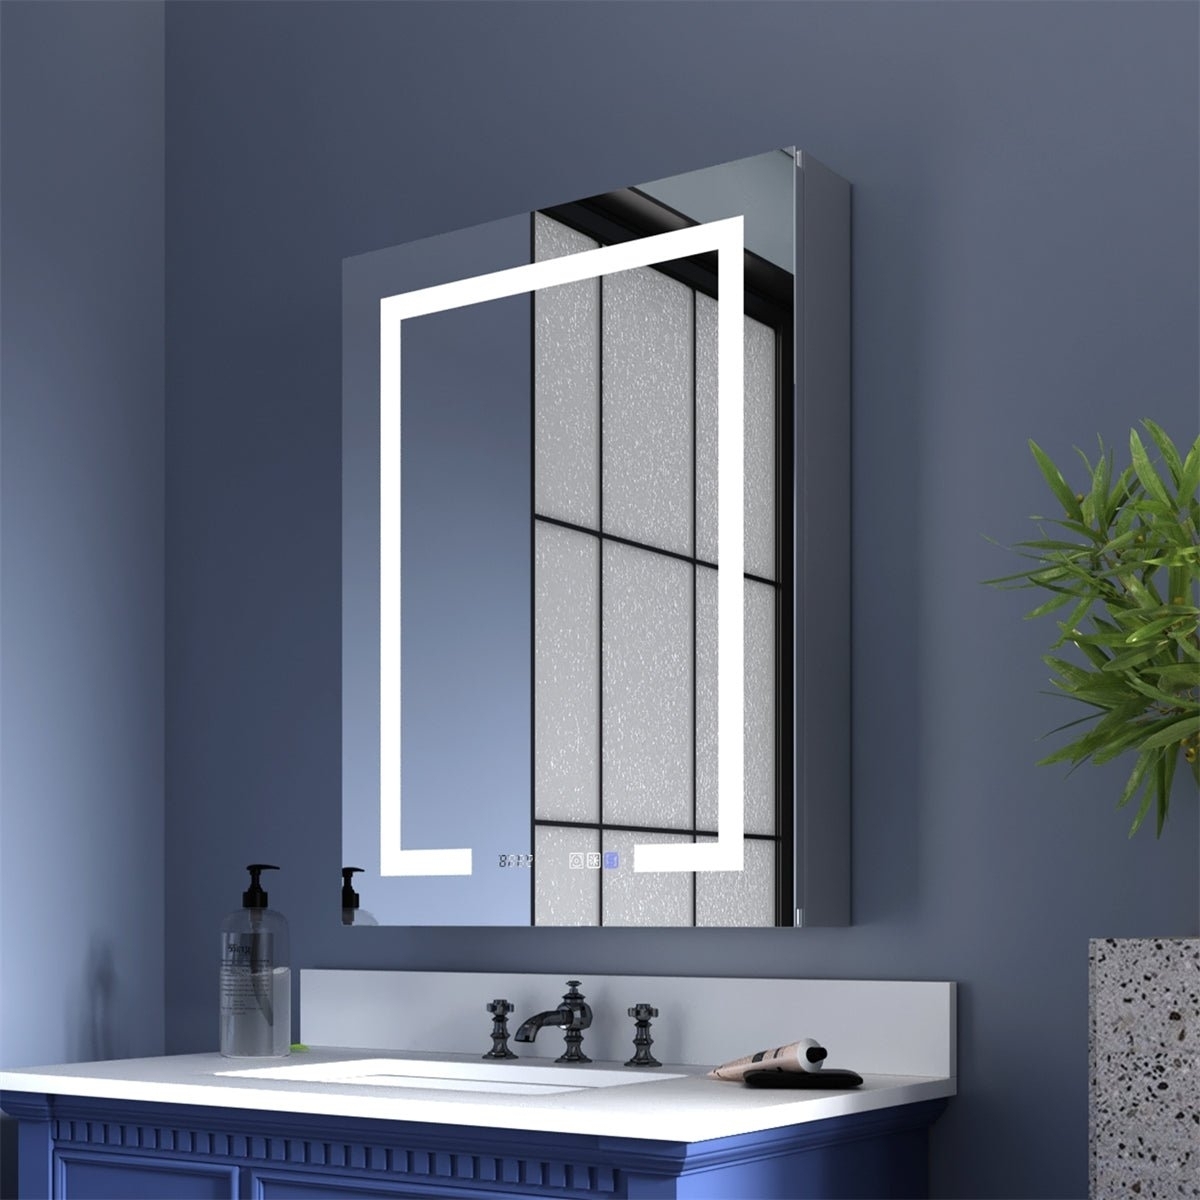 Boost-M2 24 W X 32 H LED Lighted Bathroom Medicine Cabinet With Mirror And Clock - Hinge On Left Side